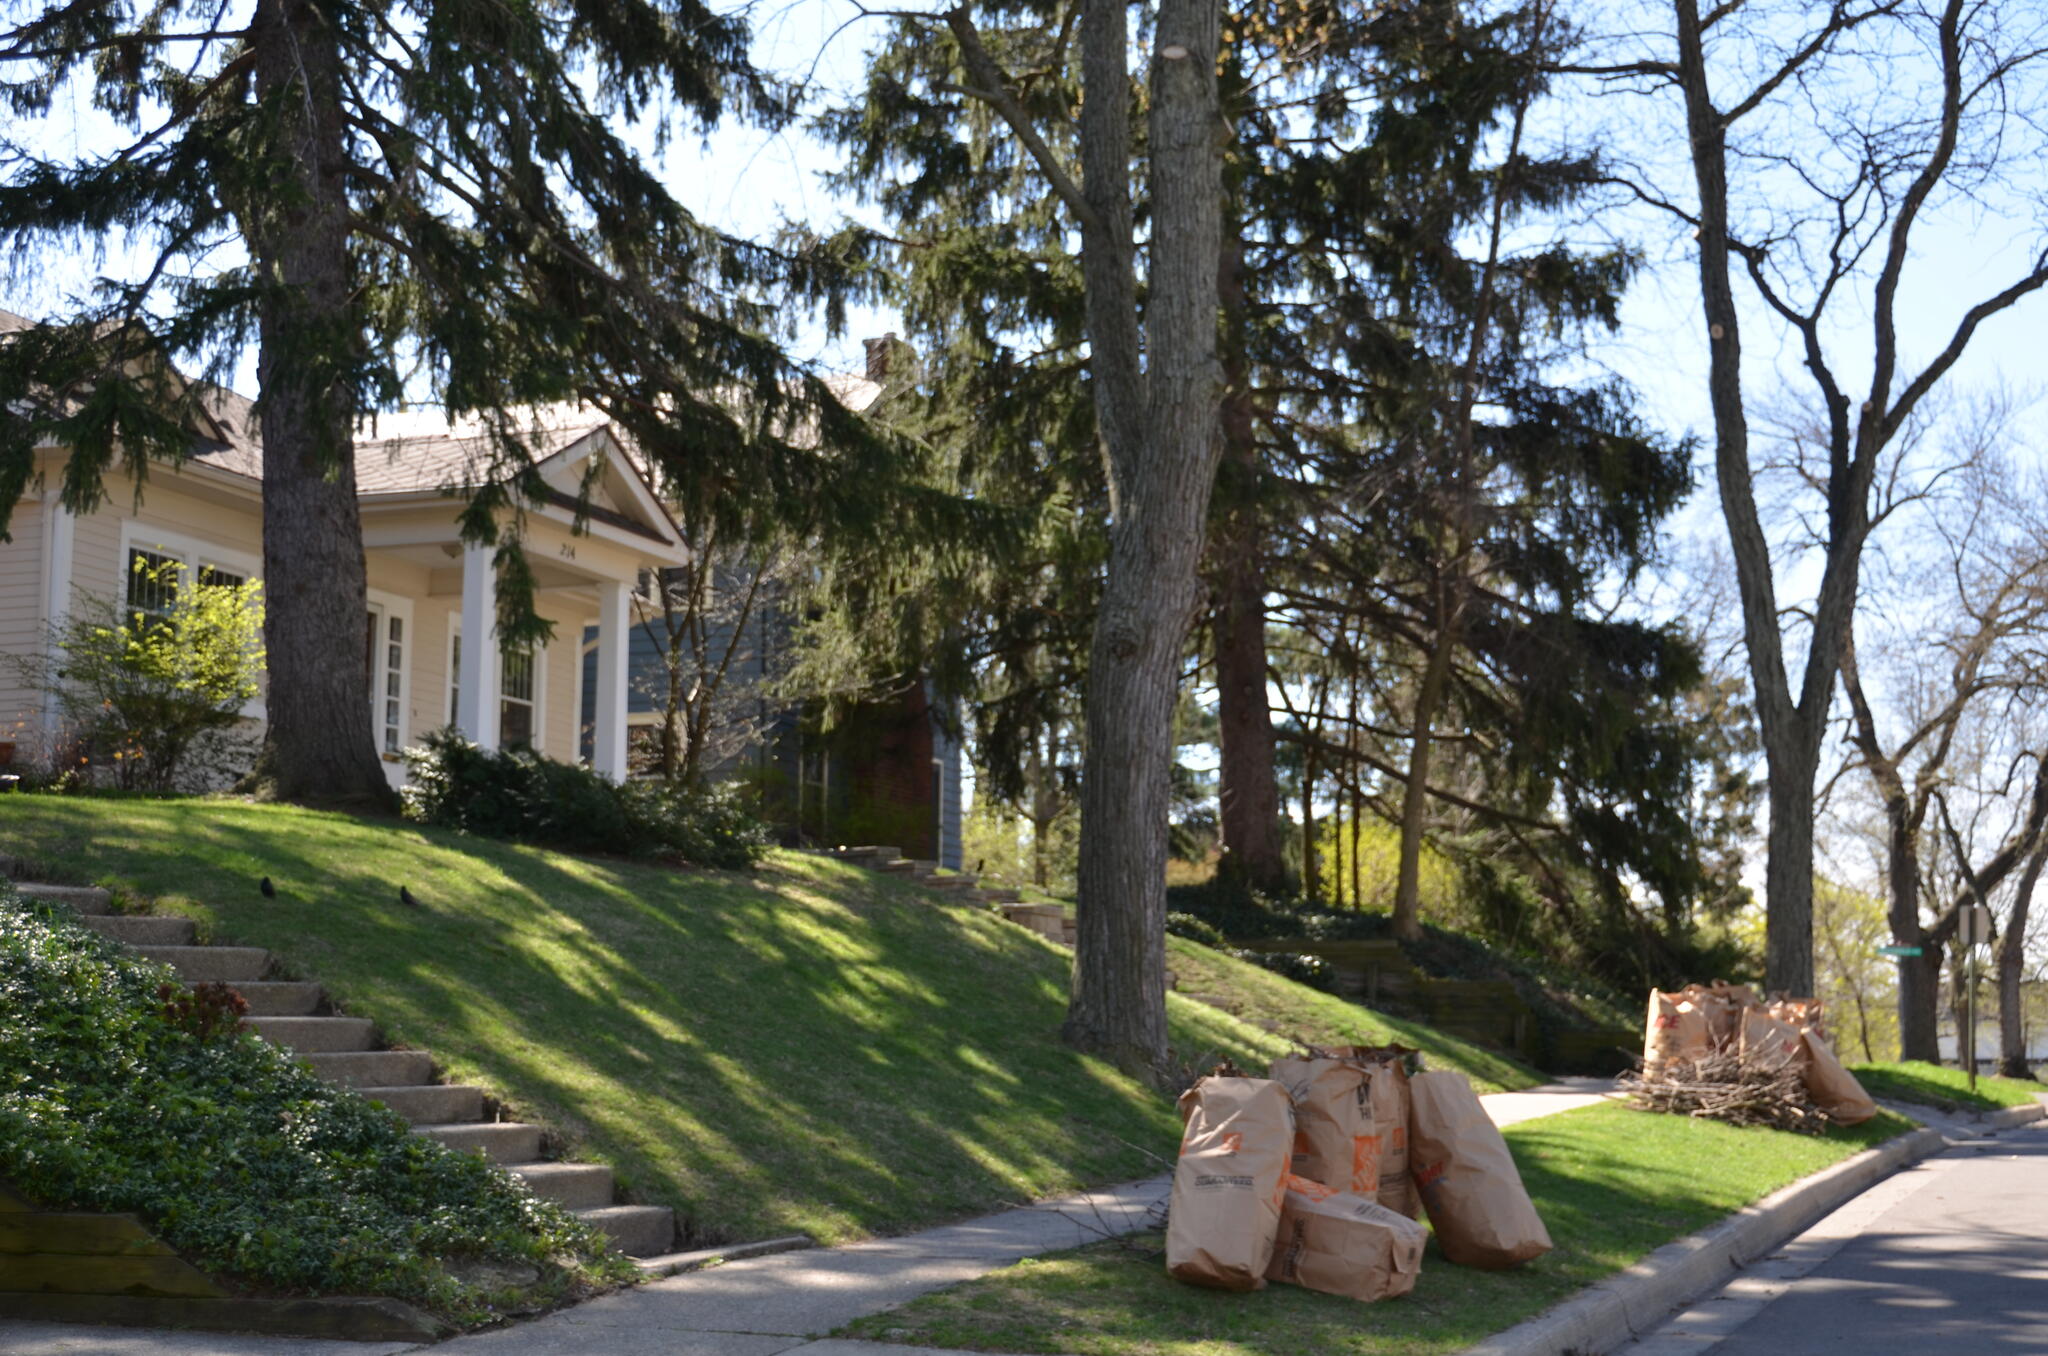 City of Lansing to begin curbside collection of yard waste